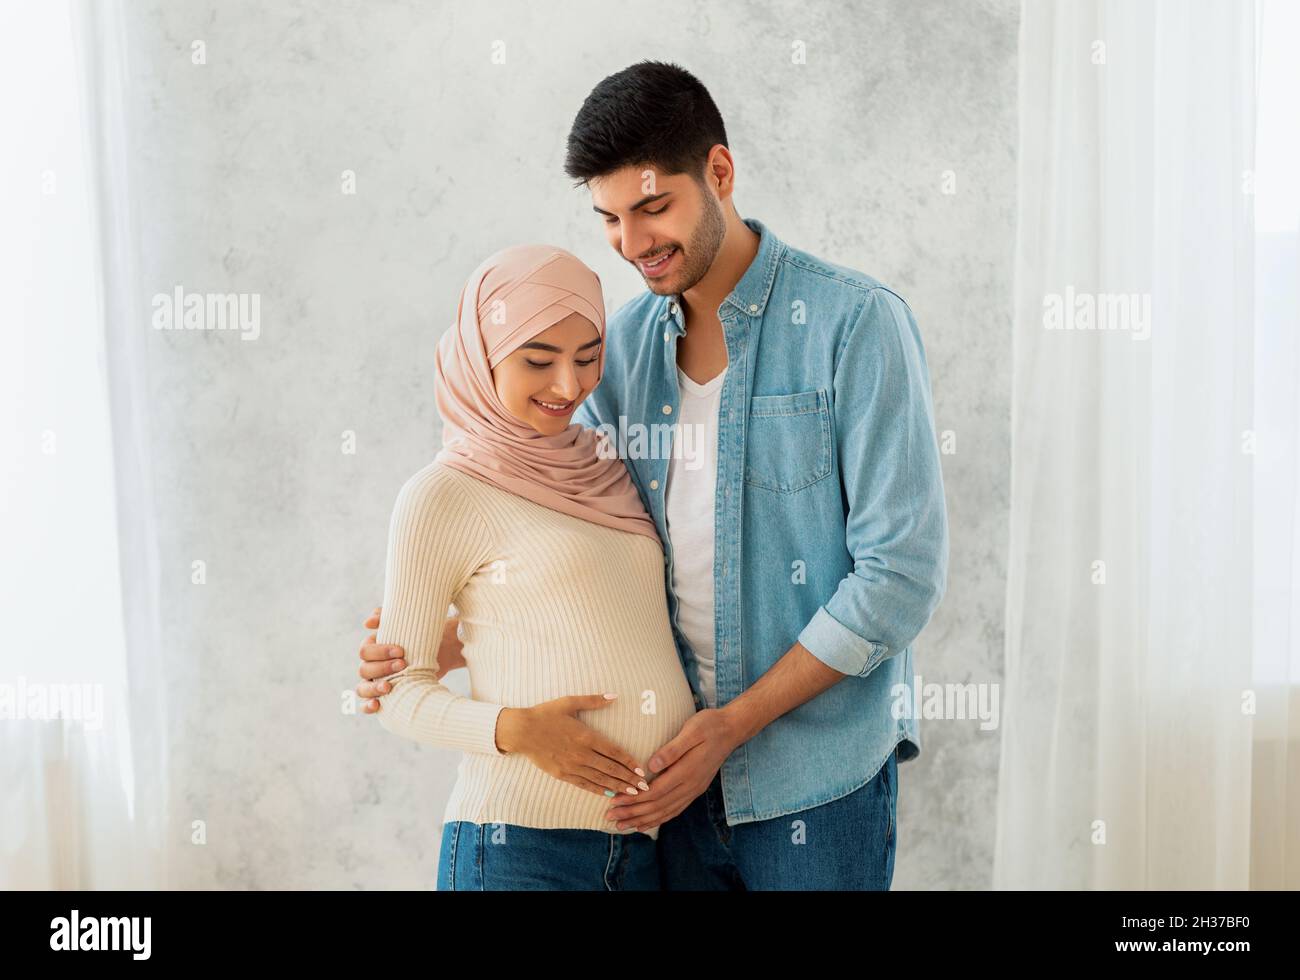 Parenthood concept. Loving arab pregnant woman and her husband embracing, smiling and touching belly Stock Photo